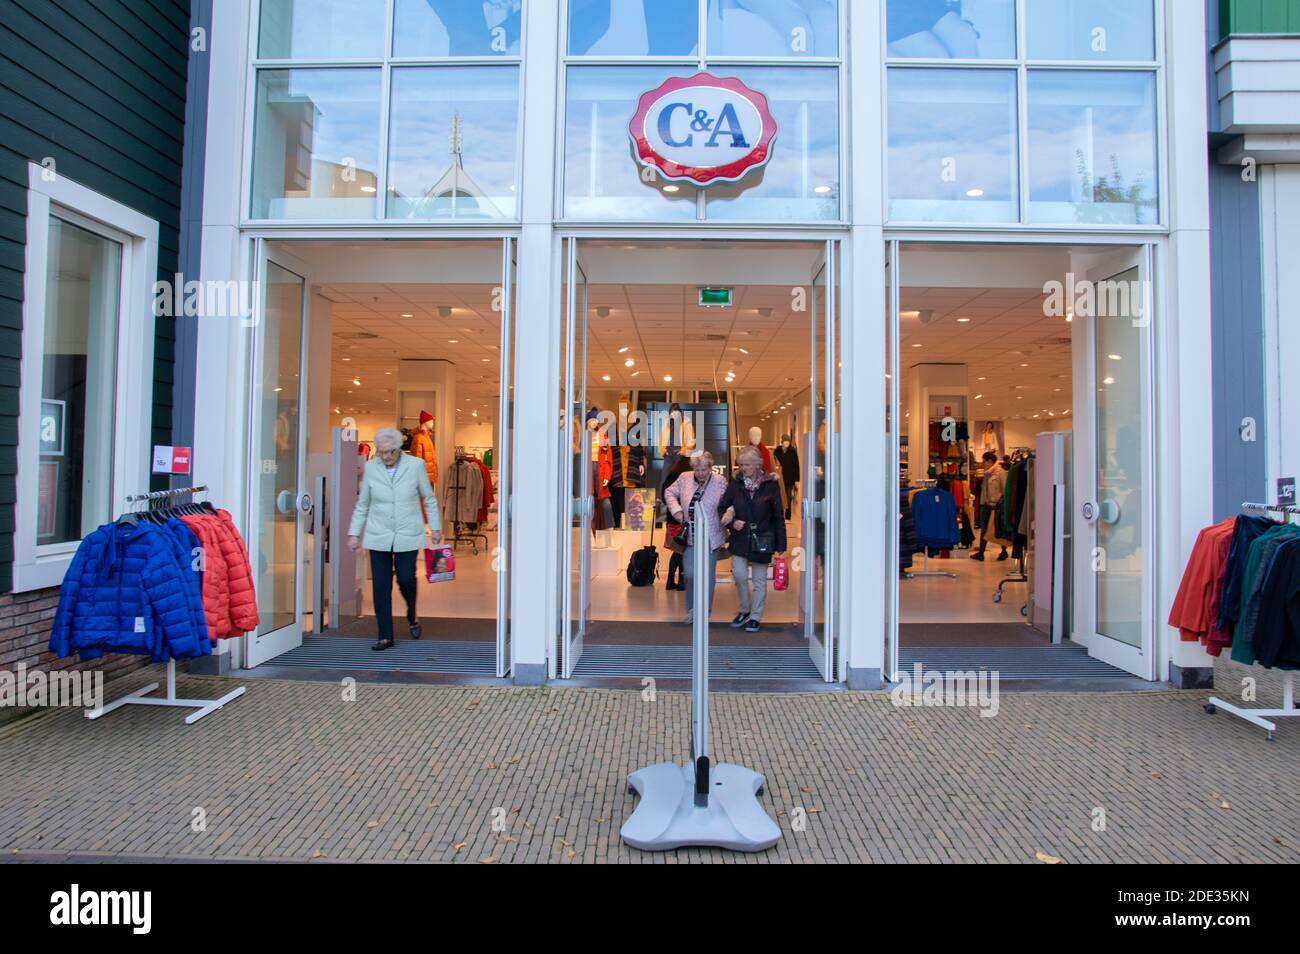 C&A Store At Amsterdam The Netherlands 23-10-2019 Stock Photo - Alamy